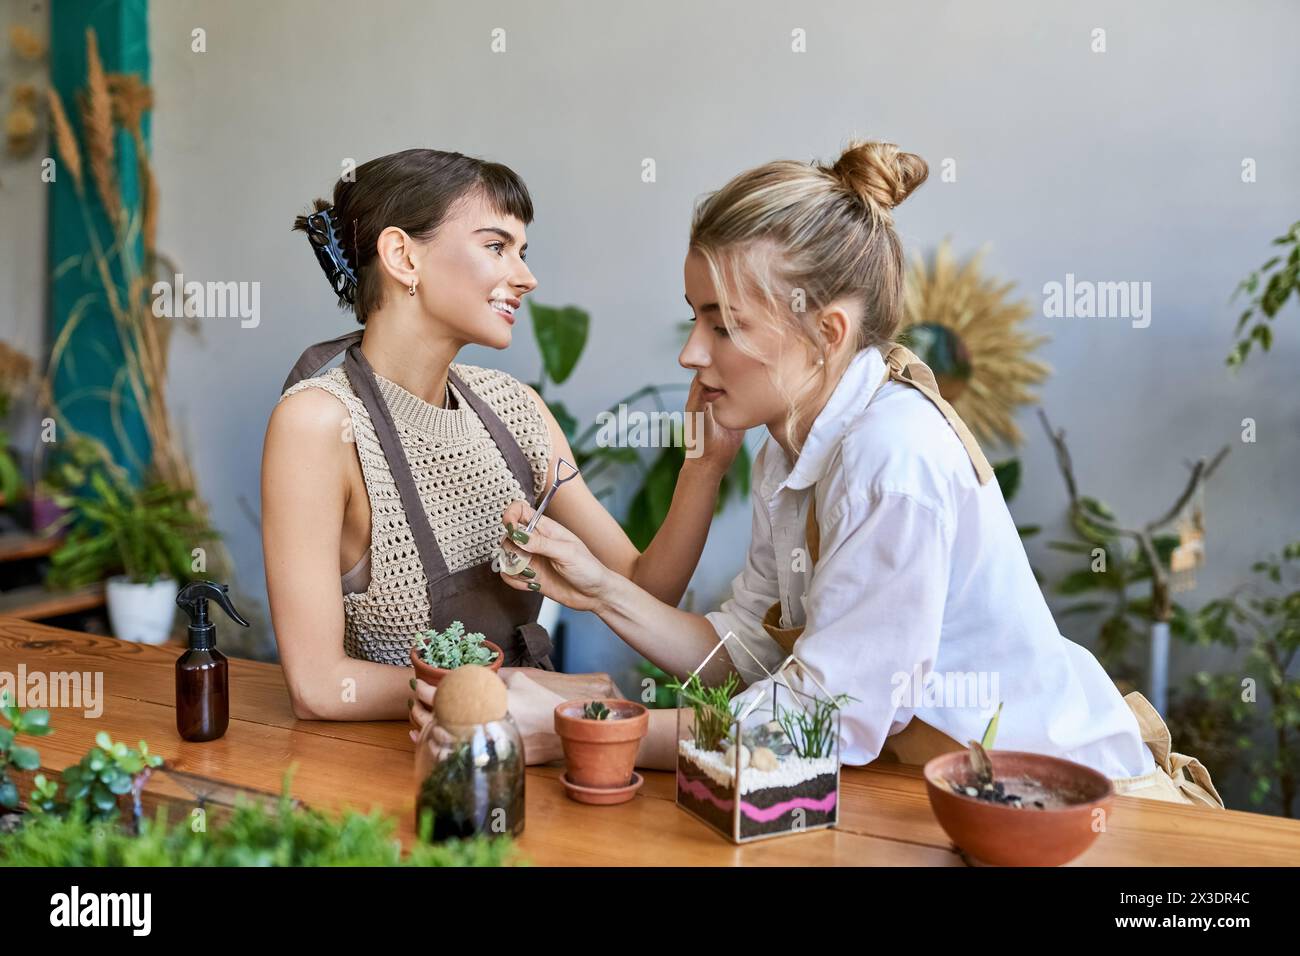 Two arty women sit at a table surrounded by potted plants, creating together with loving tenderness. Stock Photo